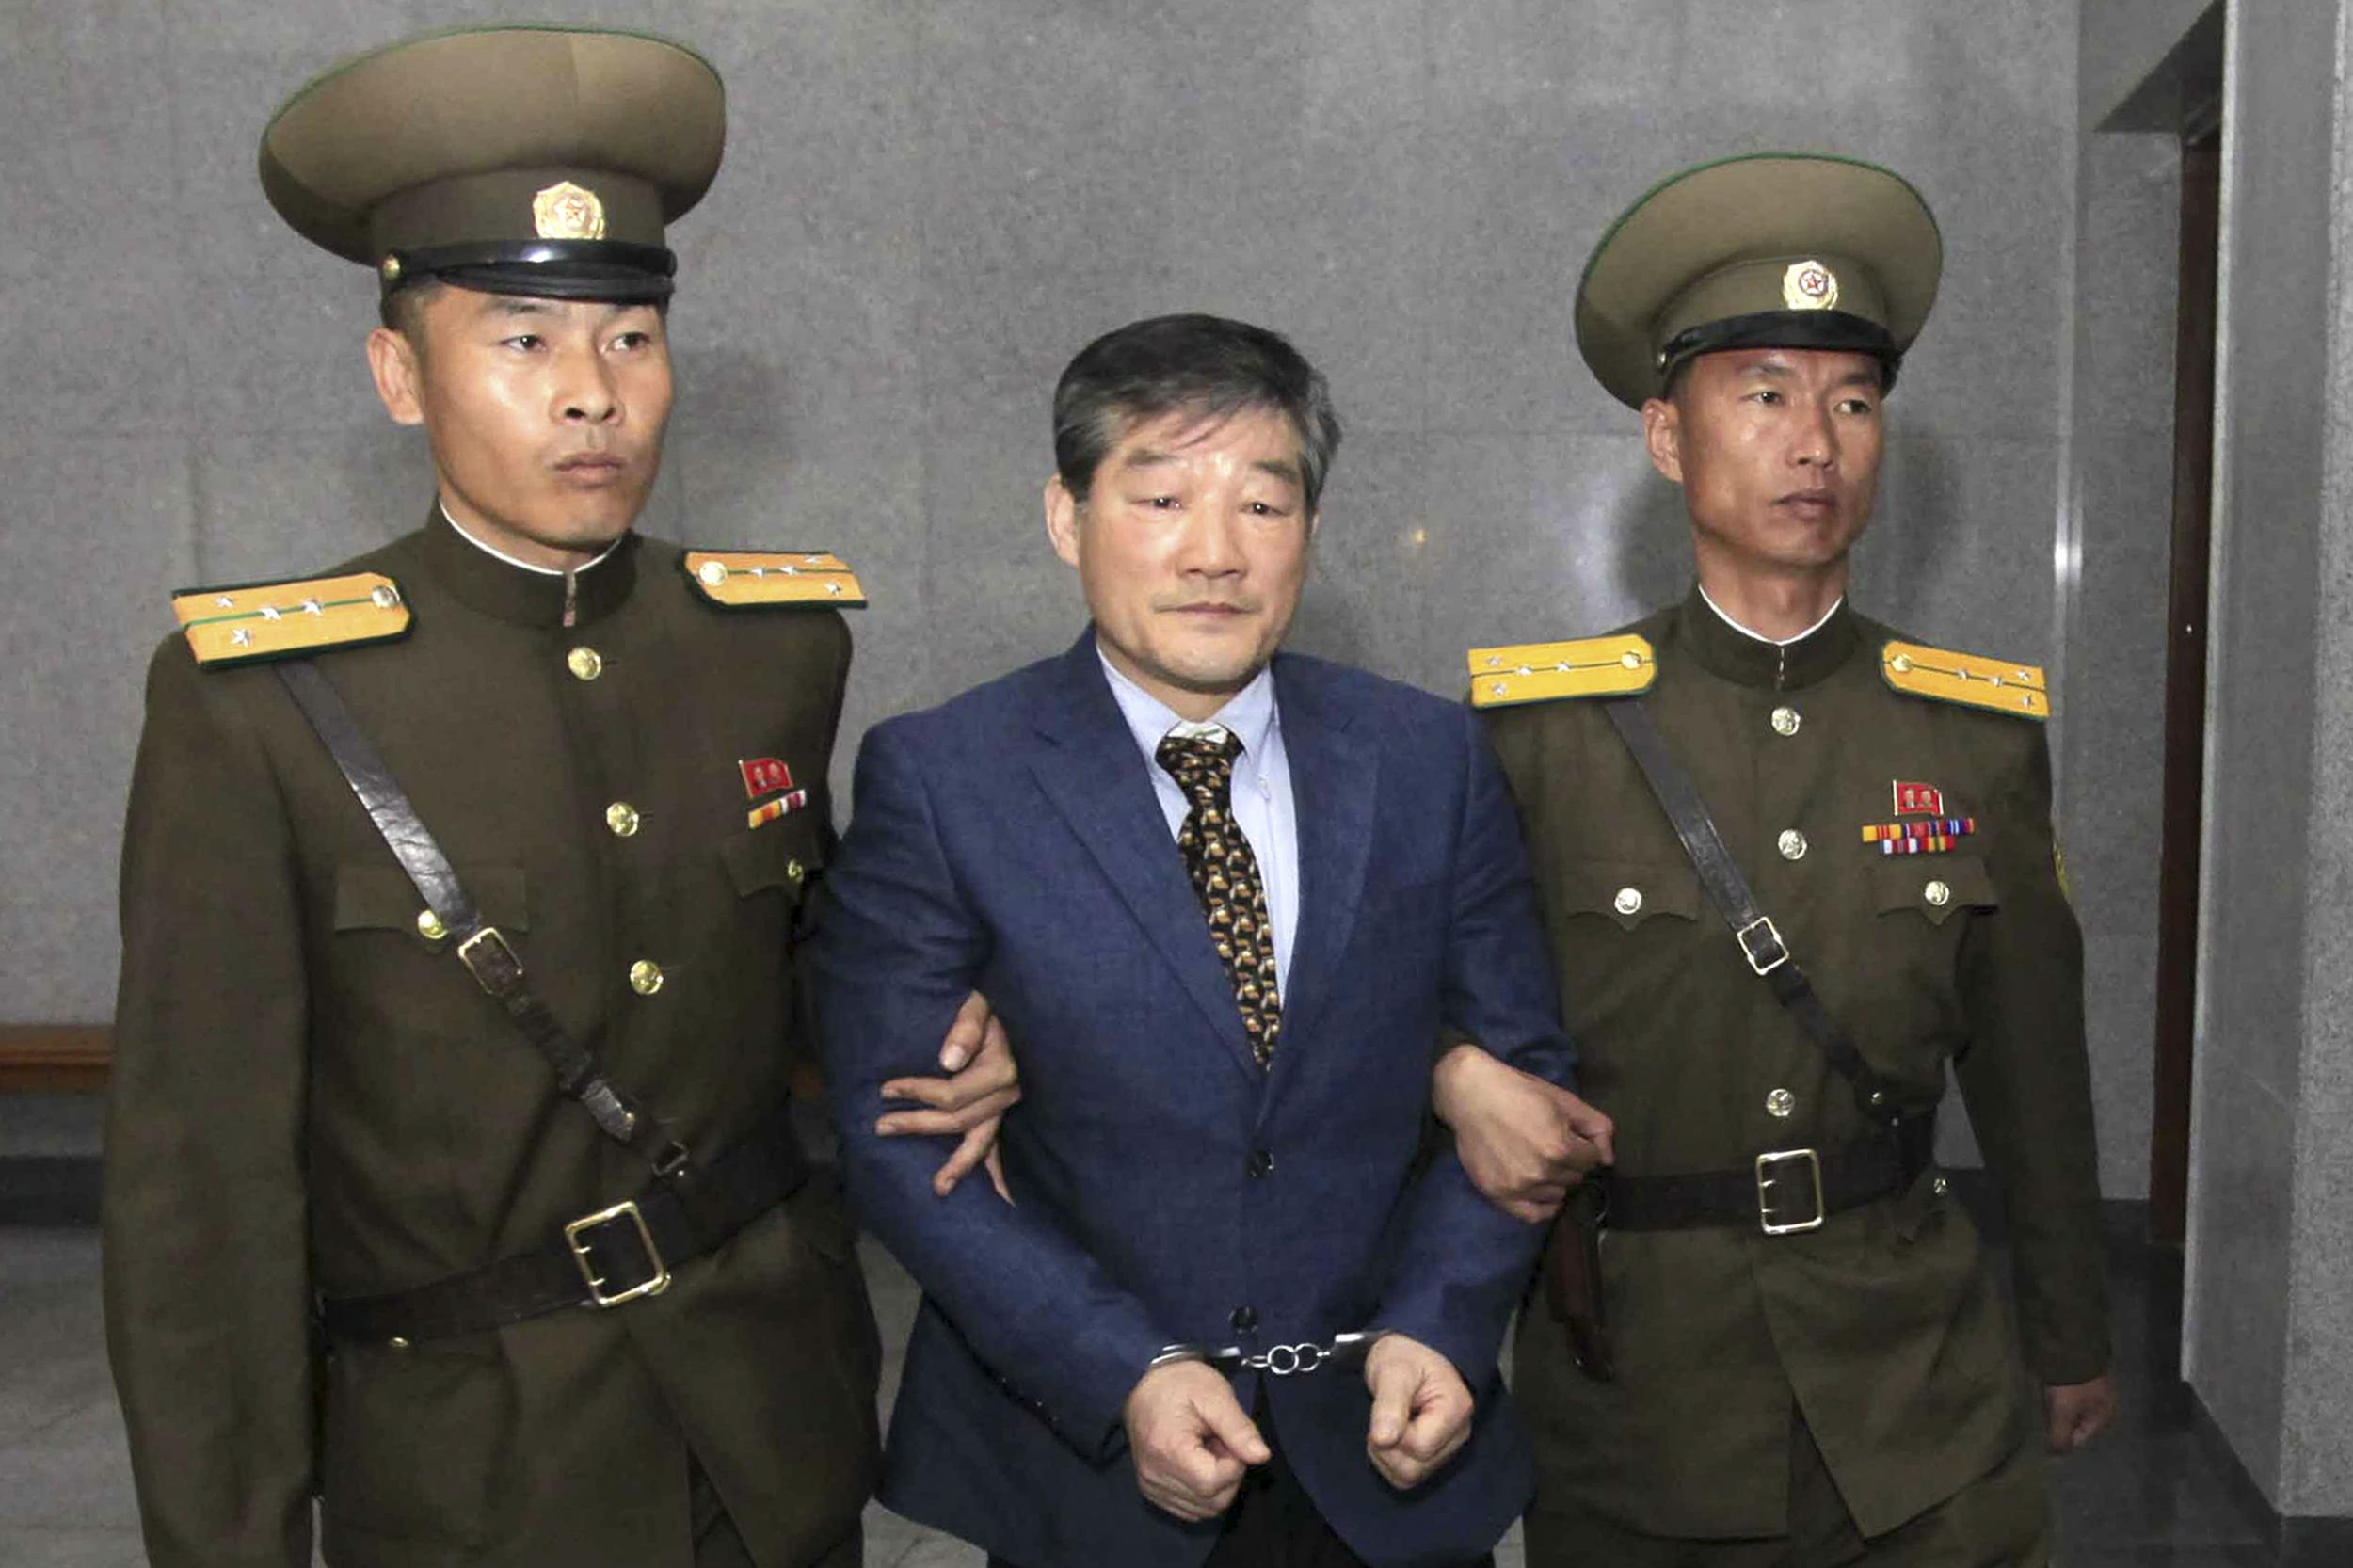 Mr Kim, who lived in Virginia, 'confessed' that he was being paid by South Korea intelligence agencies